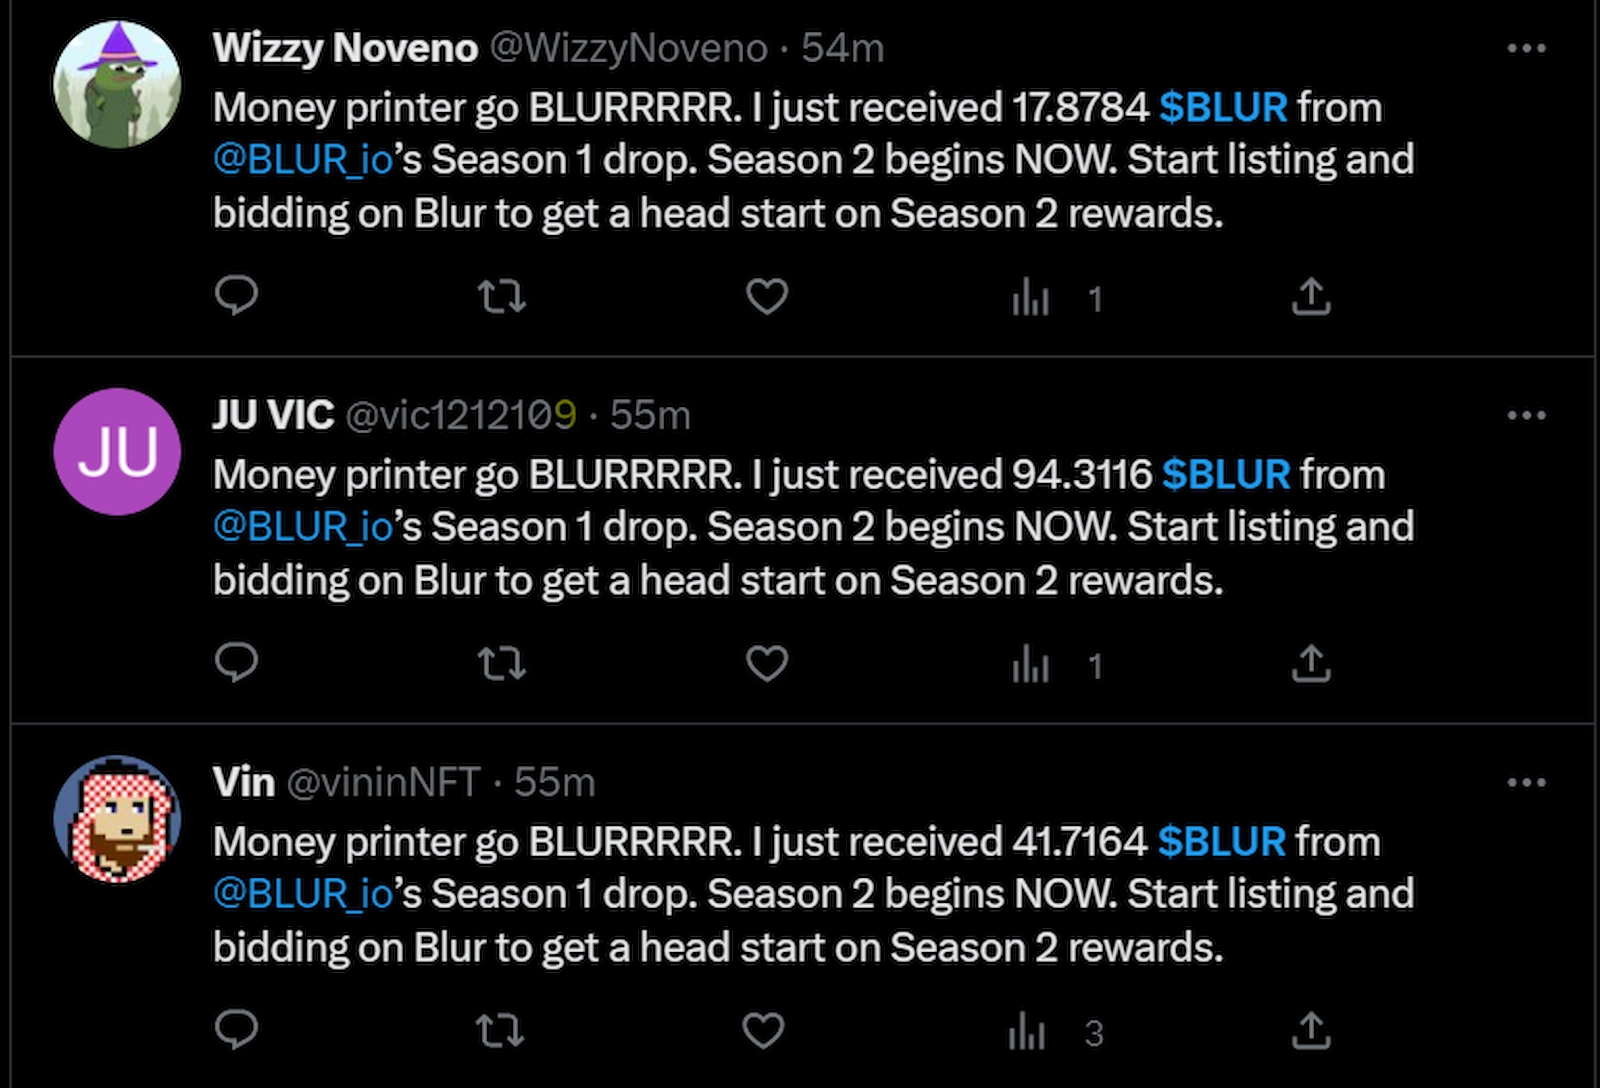 Several accounts were busy shilling the BLUR coin.